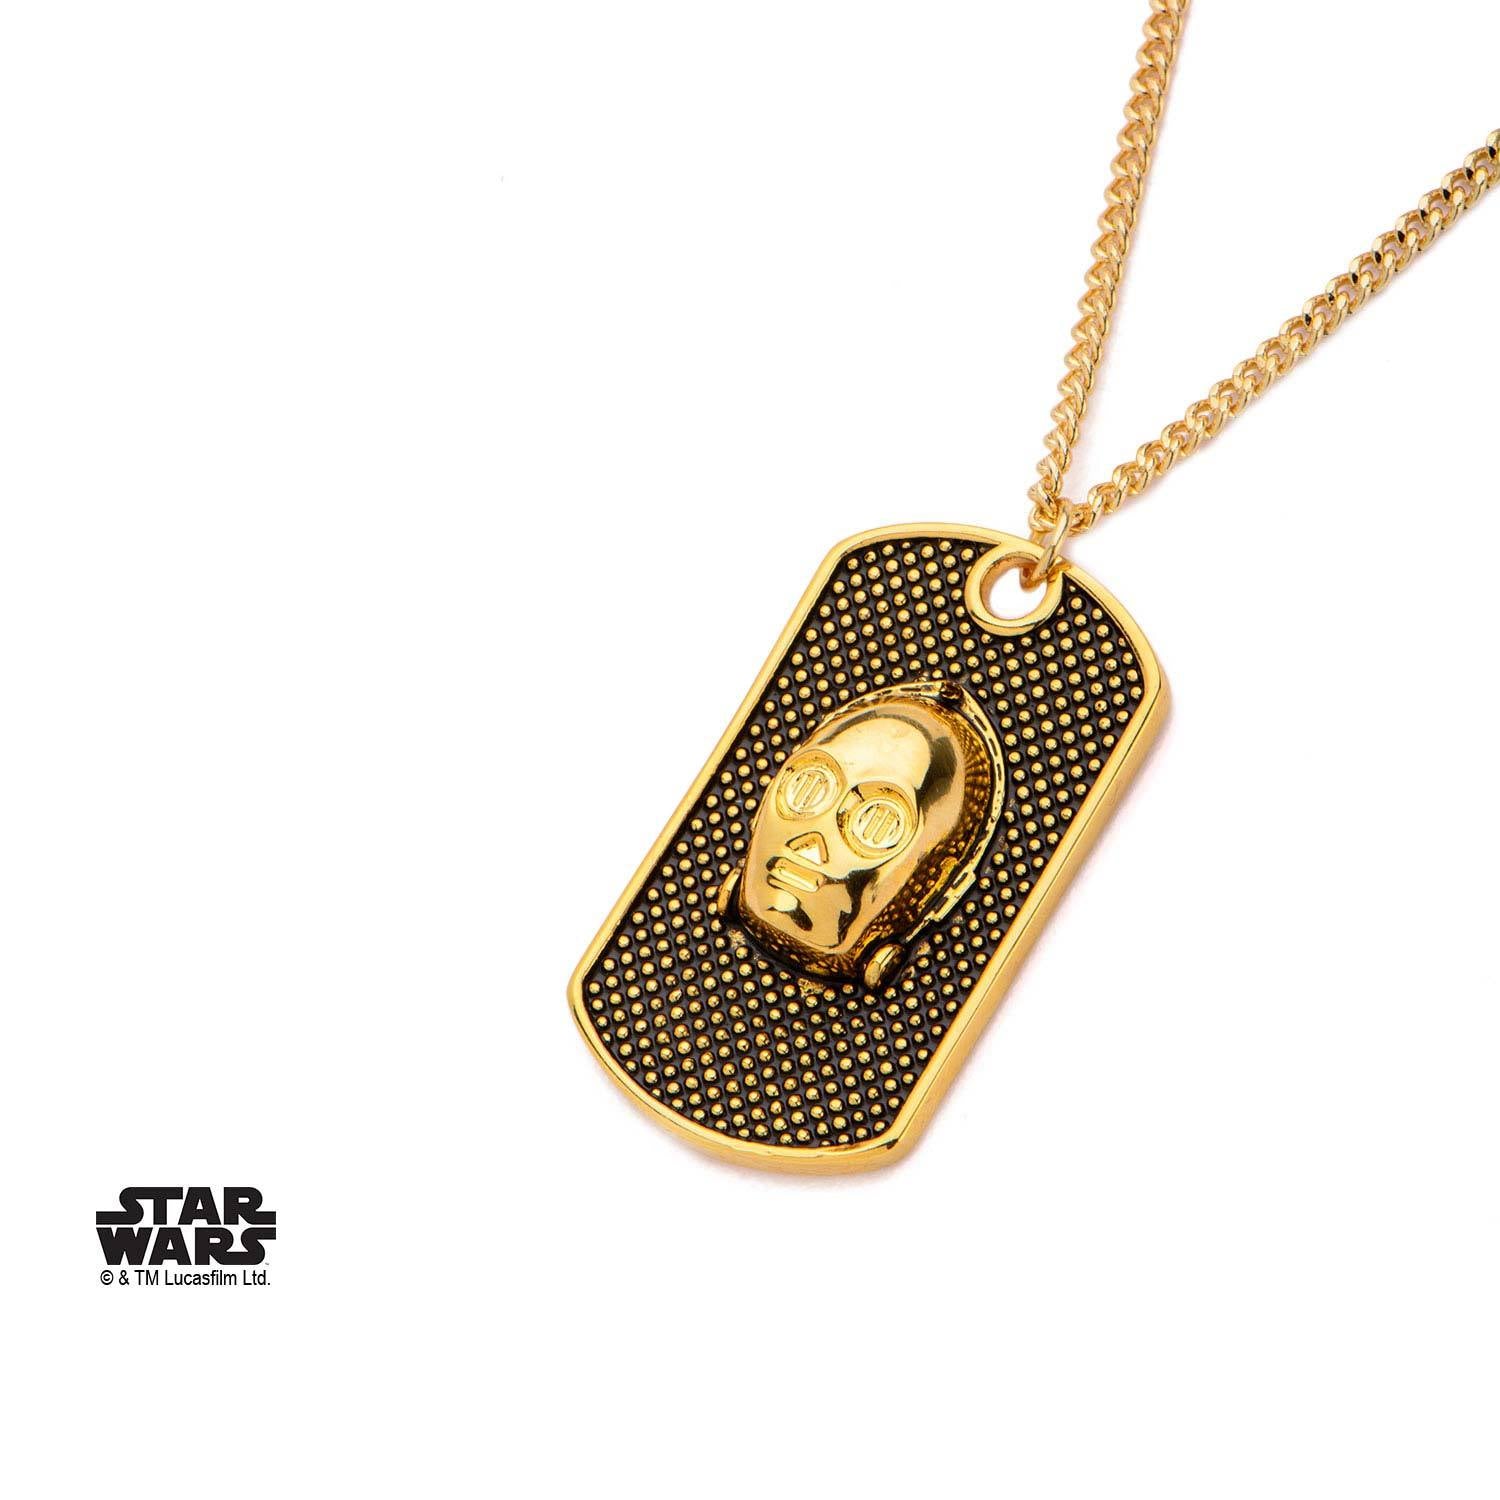 Star Wars 3D C-3PO Face Dog Tag Pendant Necklace